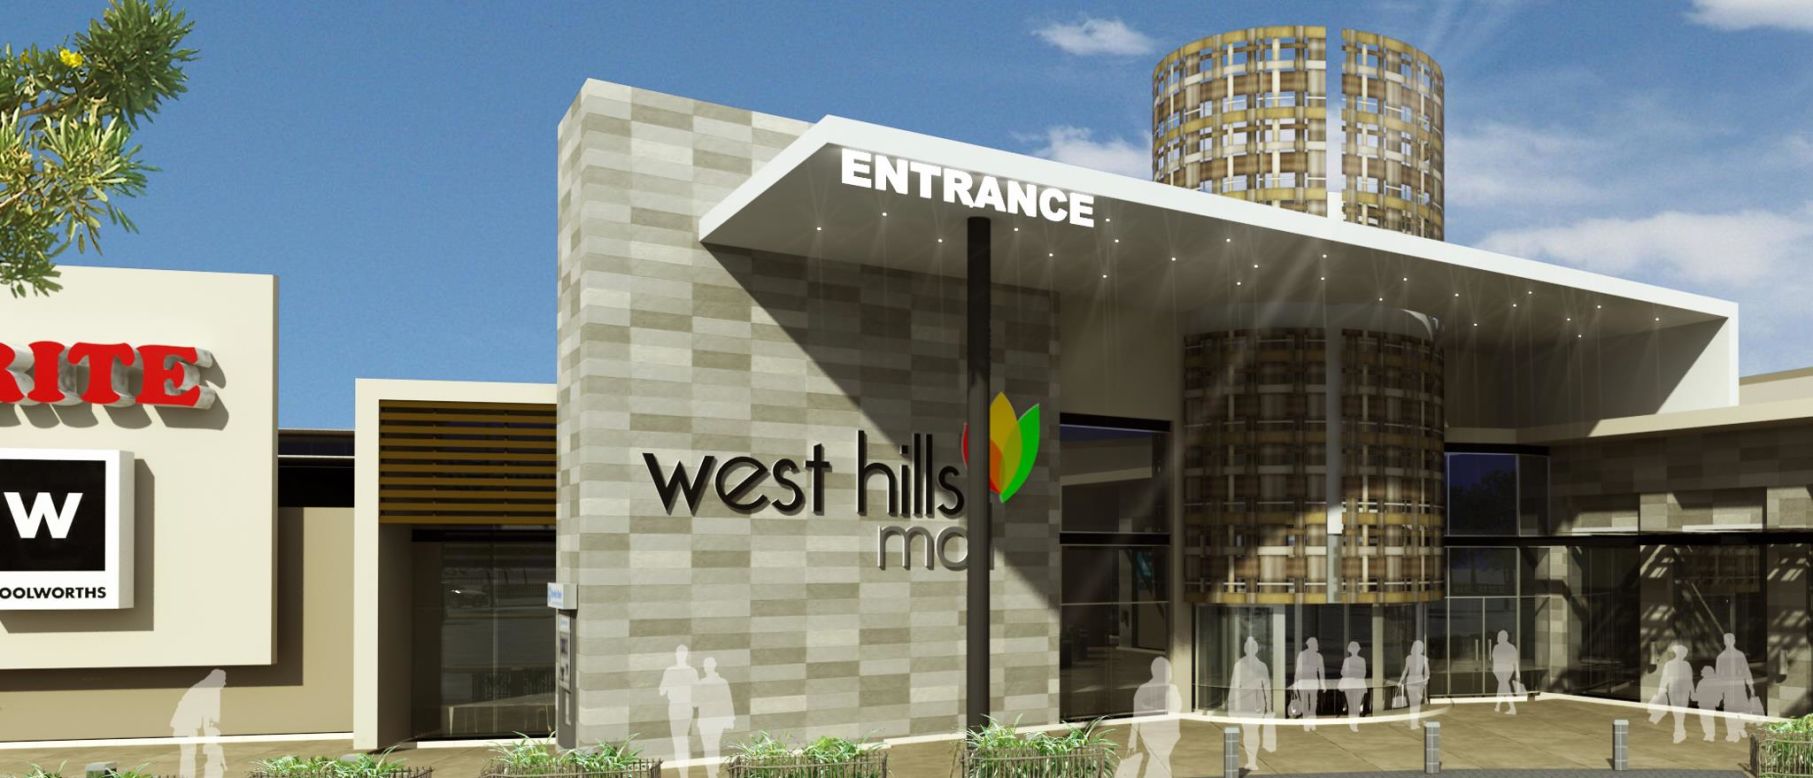 The West Hills Mall in Accra, Ghana, is just one of several new developments that will soon adorn the city's skyline.